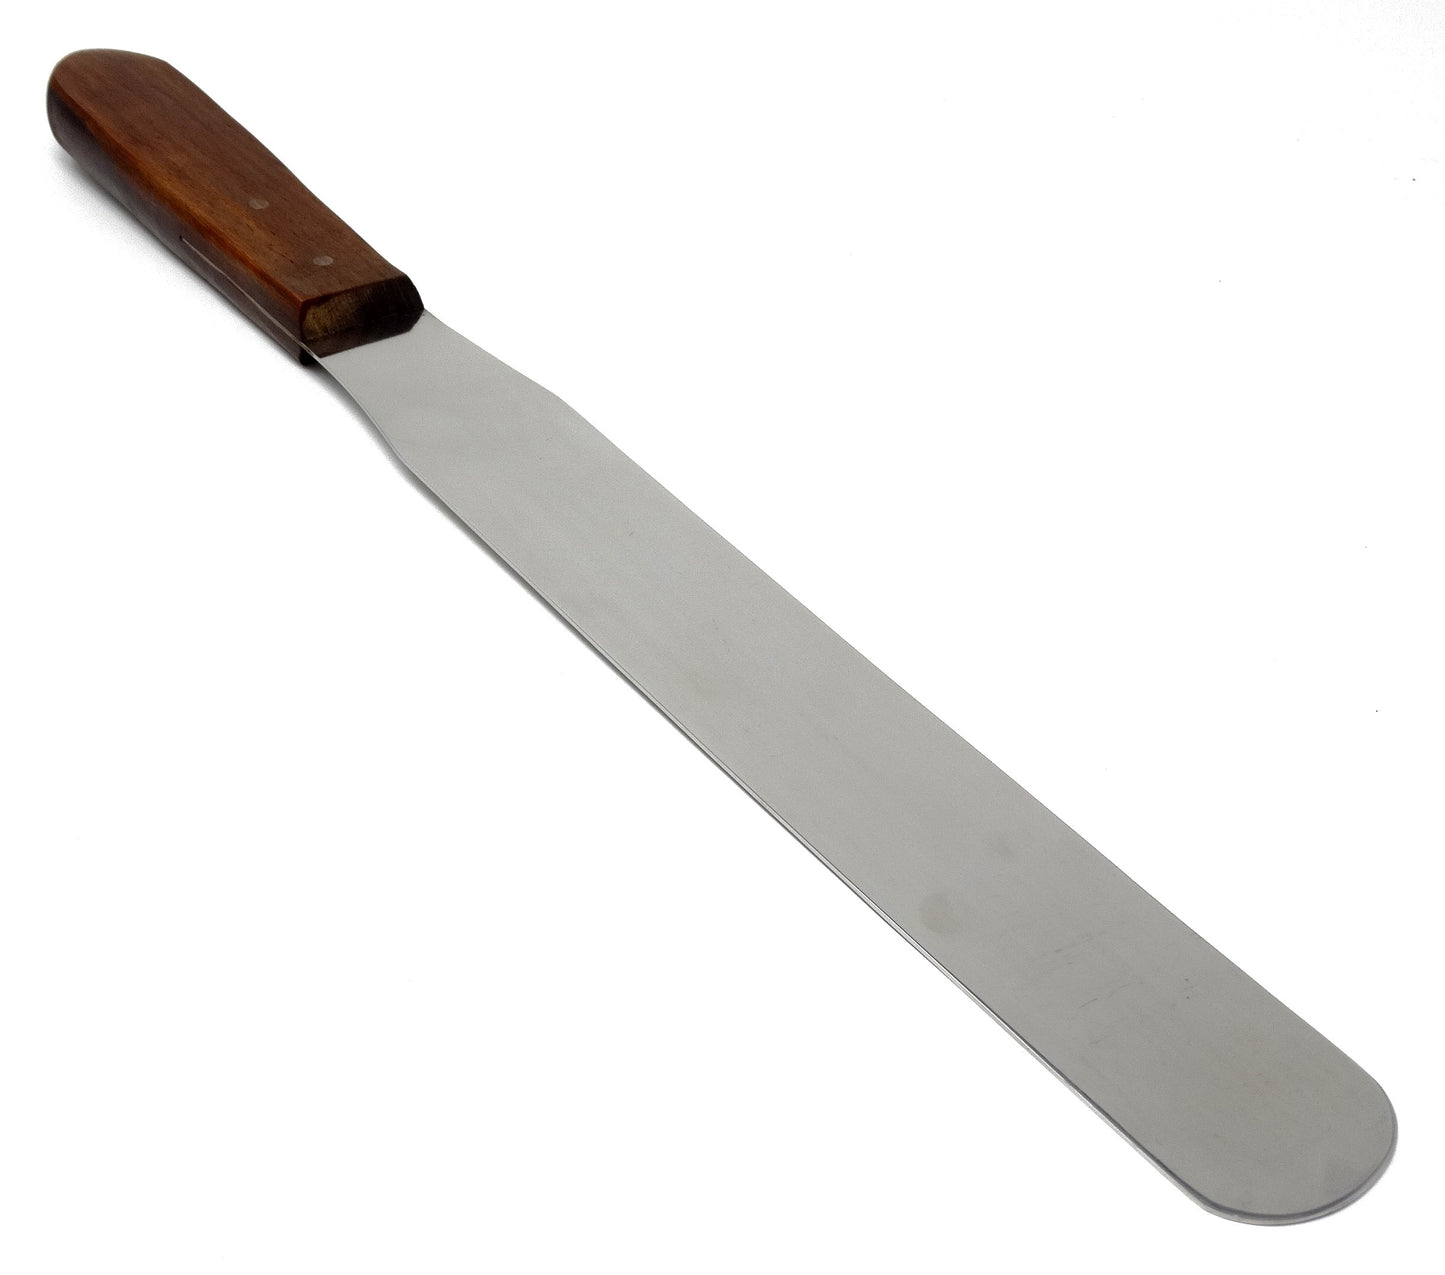 IMS-WHS10 Stainless Steel Lab Spatula with Wooden Handle, 10" Blade, 1.5" Blade Width,  15.2" Total Length